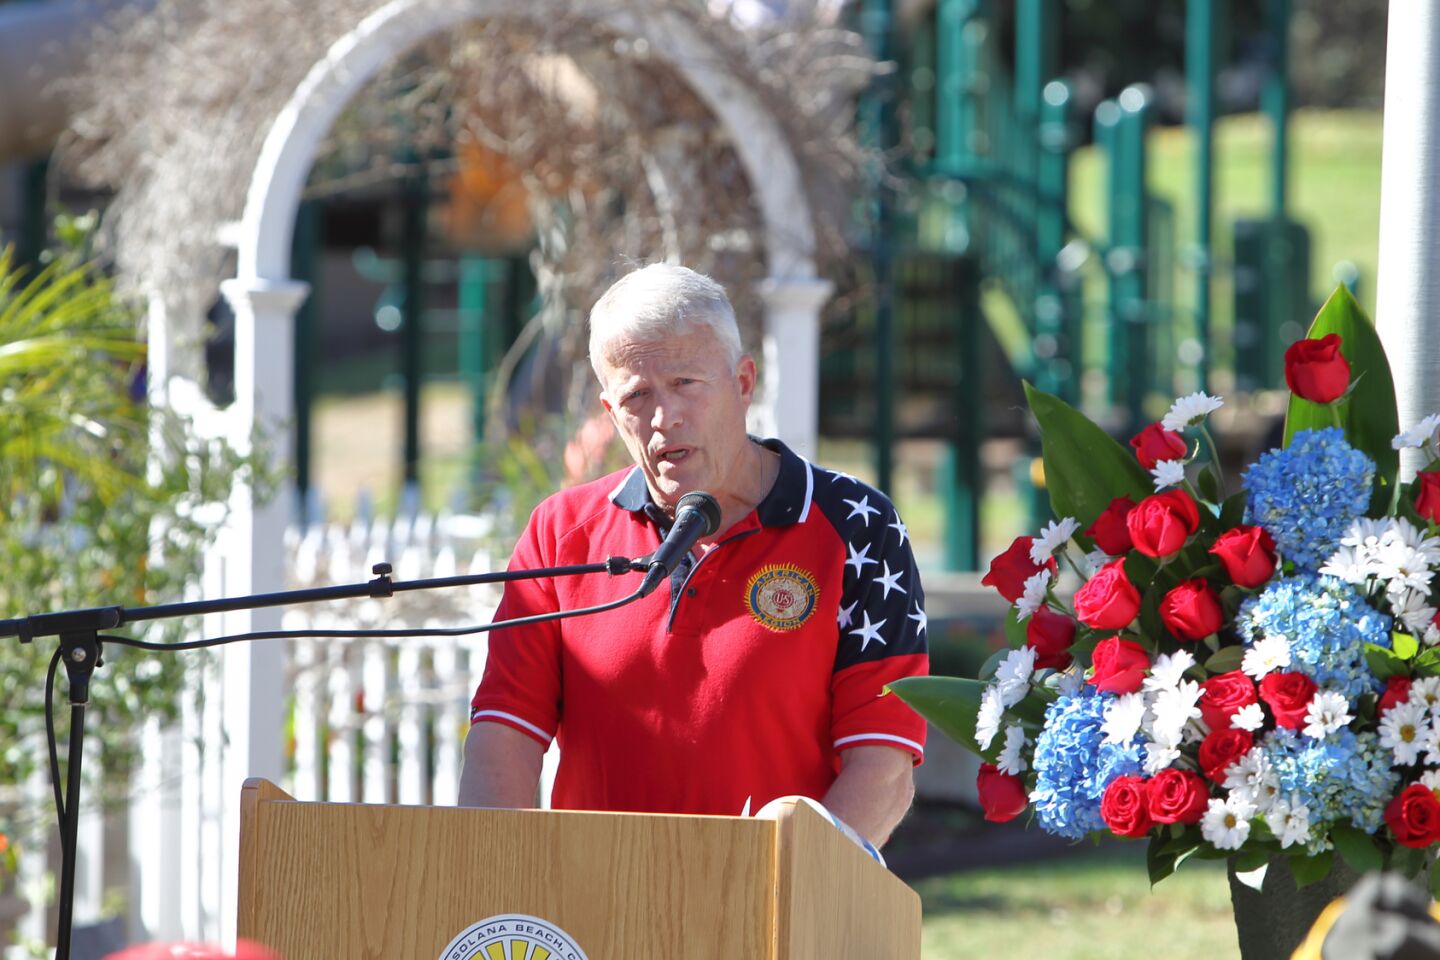 Retired USMC Lt. Col. Marty Conrad reads the poem "In Flanders Fields" at the 2021 Veterans Day Program at La Colonia Park